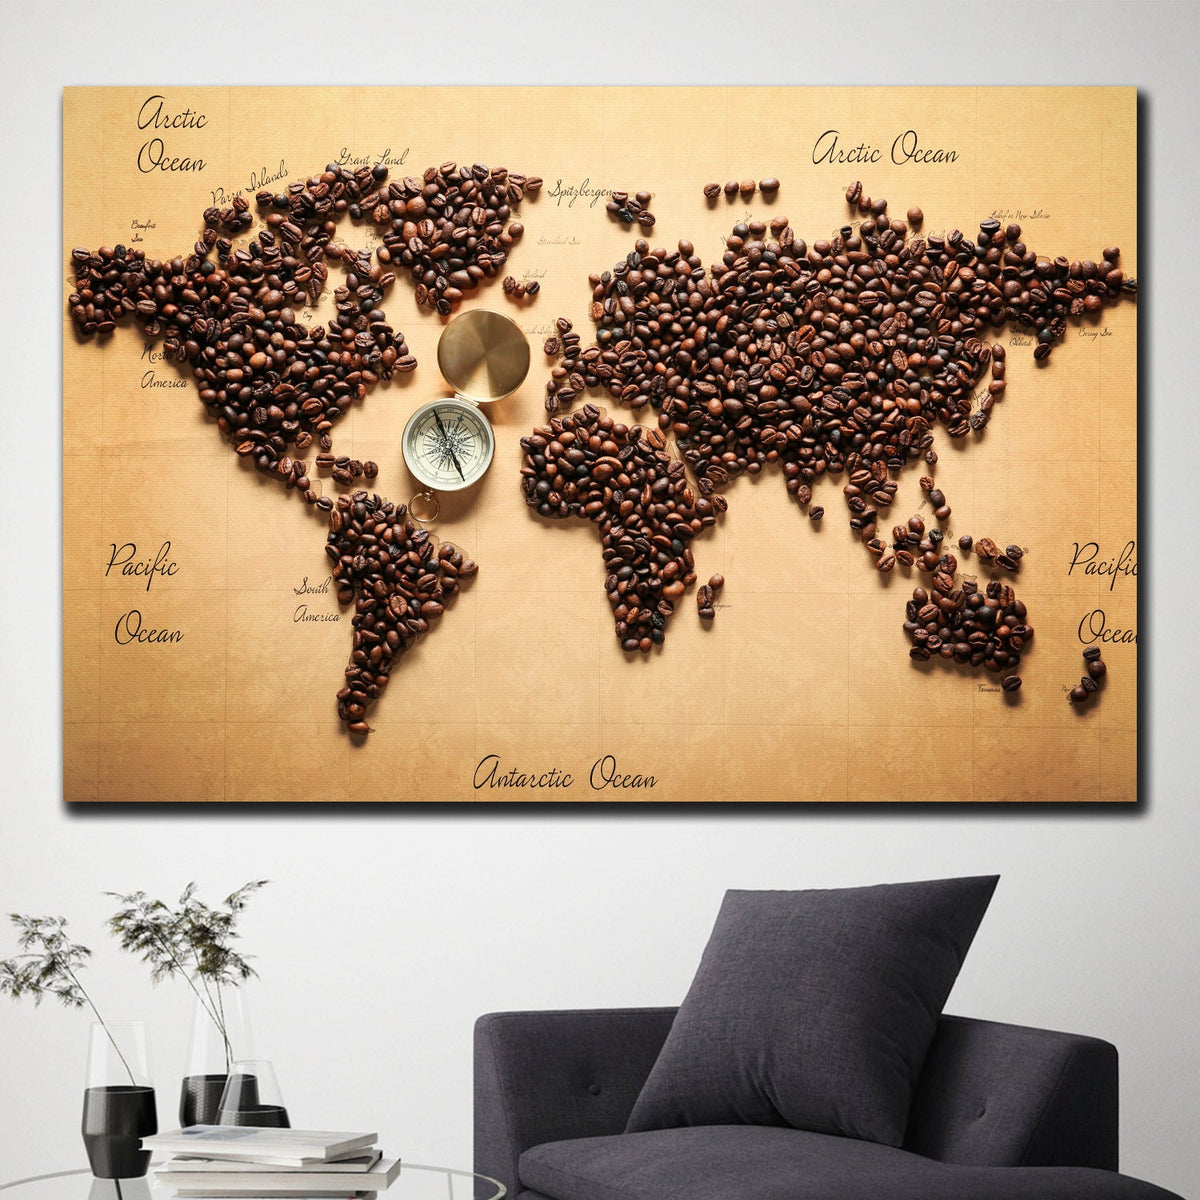 https://cdn.shopify.com/s/files/1/0387/9986/8044/products/WorldMapwithCoffeeBeansCanvasArtprintStretched-2.jpg